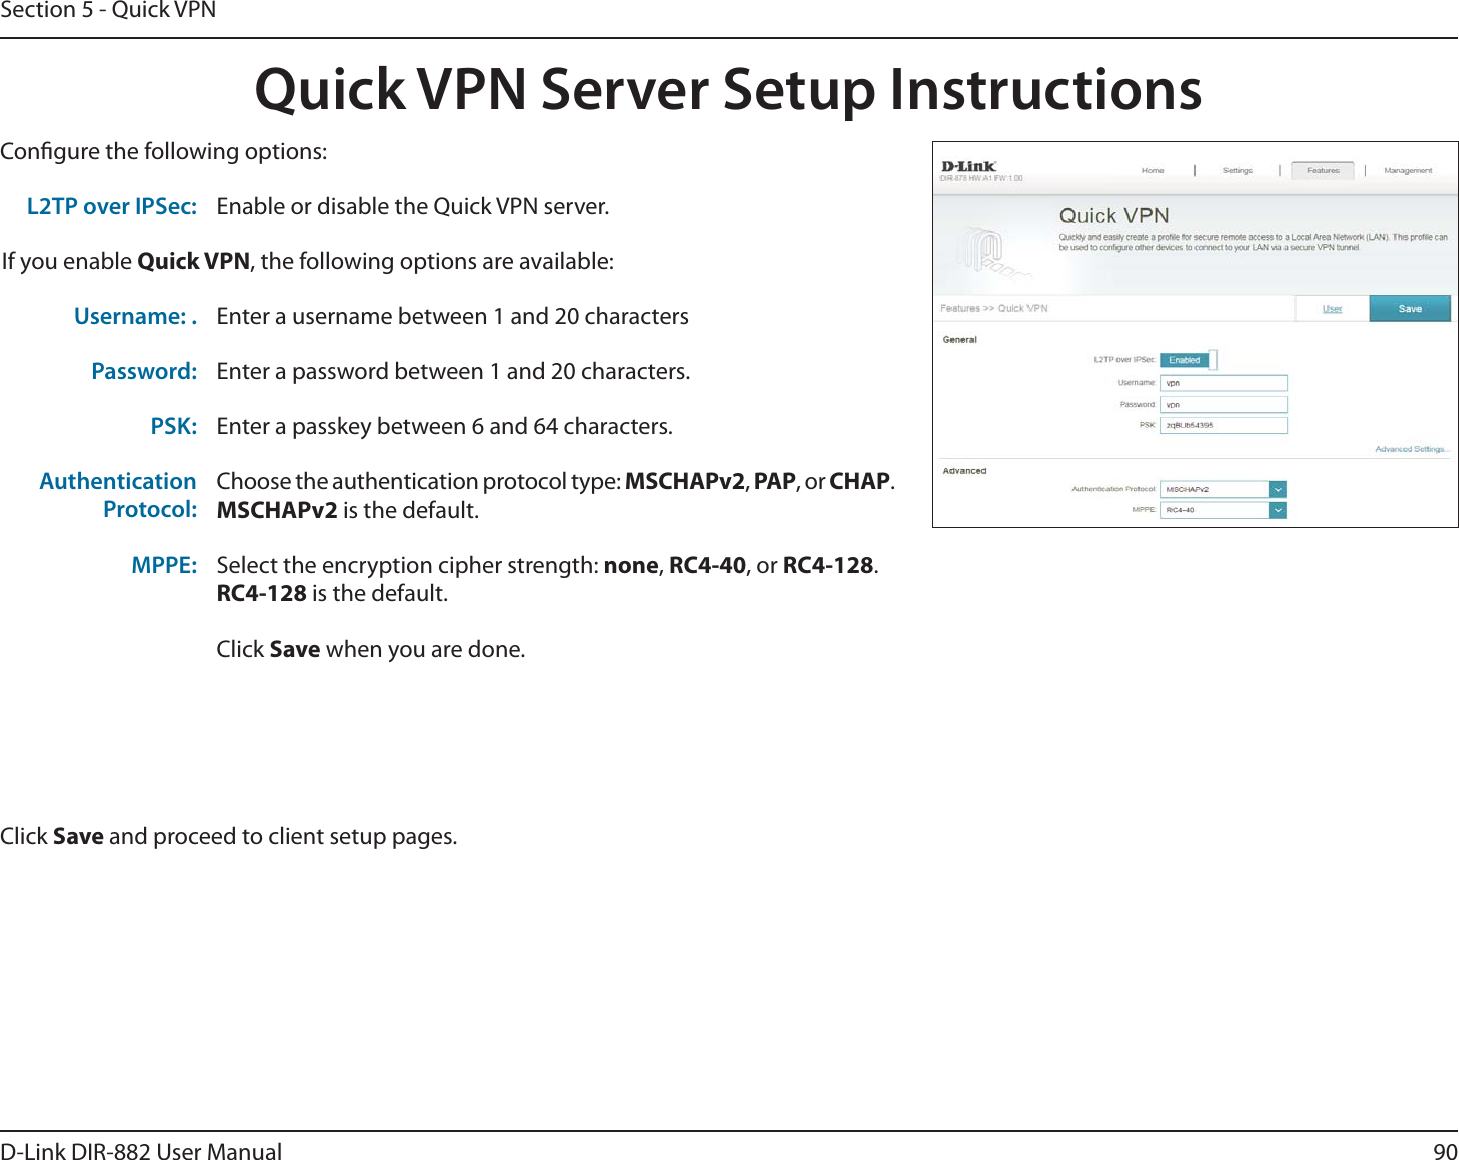 90D-Link DIR-882 User ManualSection 5 - Quick VPNQuick VPN Server Setup InstructionsCongure the following options:Click Save and proceed to client setup pages.L2TP over IPSec: Enable or disable the Quick VPN server.If you enable Quick VPN, the following options are available:Username: . Enter a username between 1 and 20 charactersPassword: Enter a password between 1 and 20 characters.PSK: Enter a passkey between 6 and 64 characters.AuthenticationProtocol:Choose the authentication protocol type: .4$)&quot;1W, 1&quot;1, or $)&quot;1..4$)&quot;1Wis the default.MPPE: Select the encryption cipher strength: none, RC4-40, or RC4-128.RC4-128 is the default.Click Save when you are done.